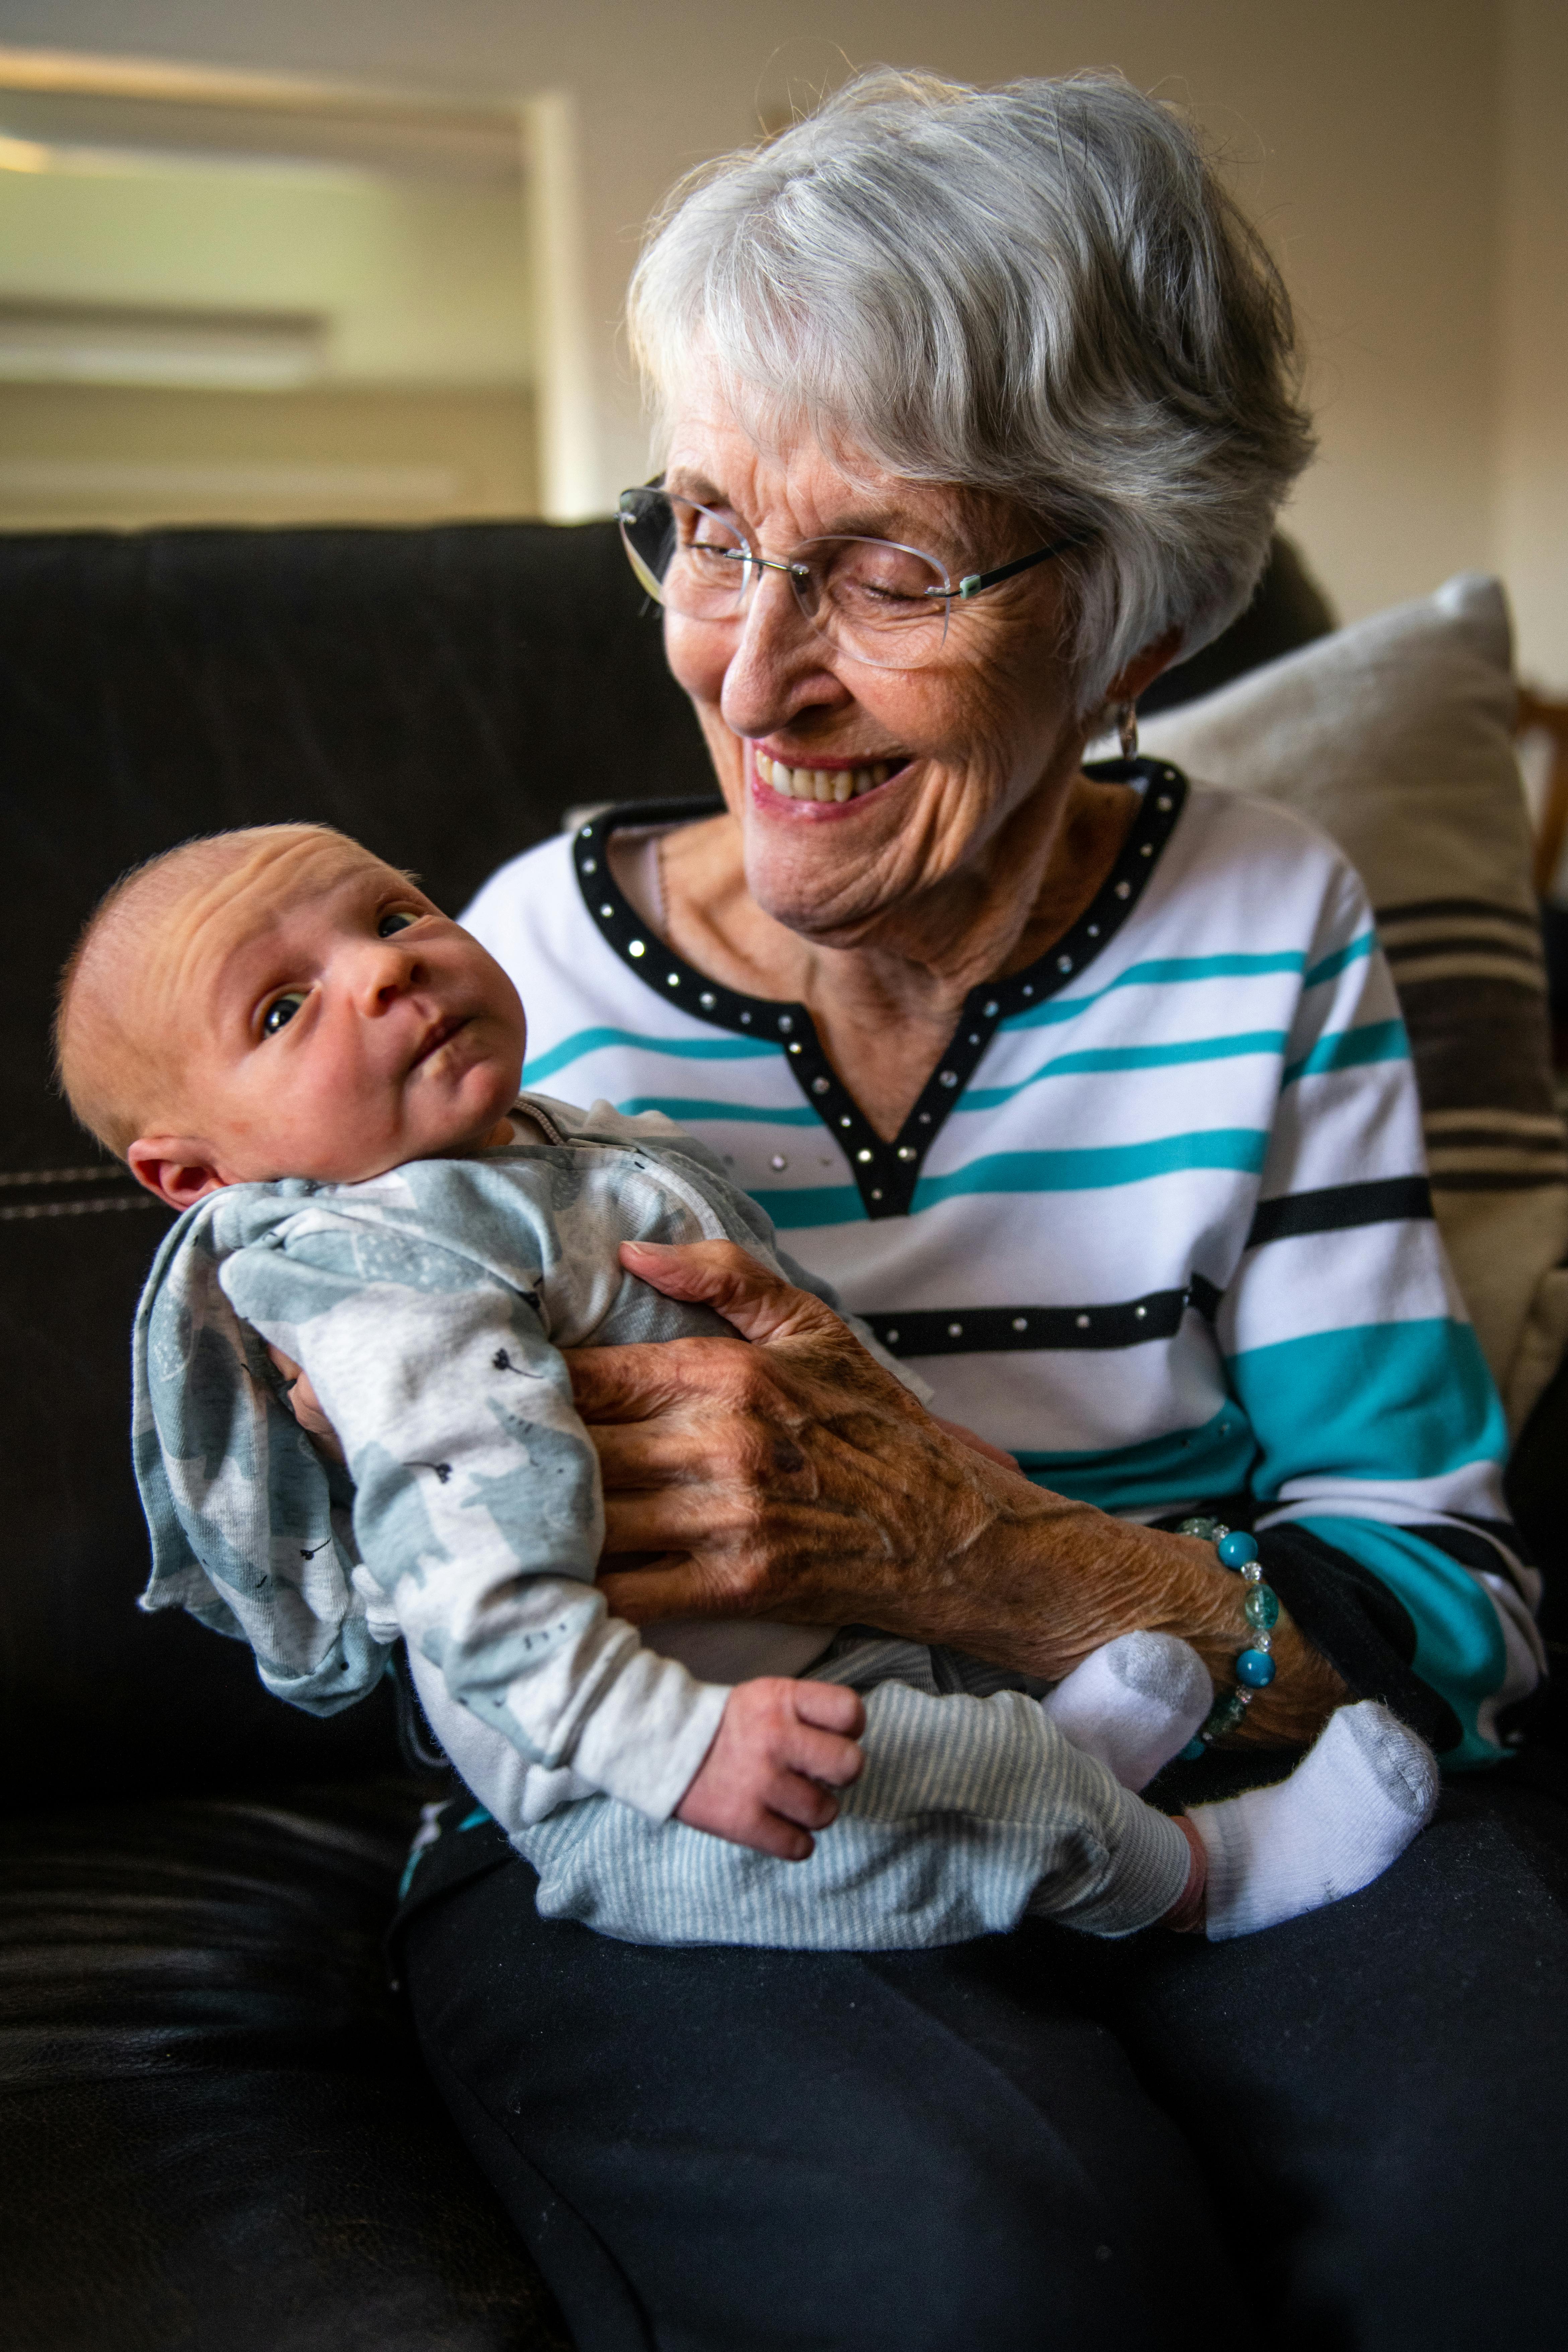 An elderly woman playing with a baby | Source: Pexels